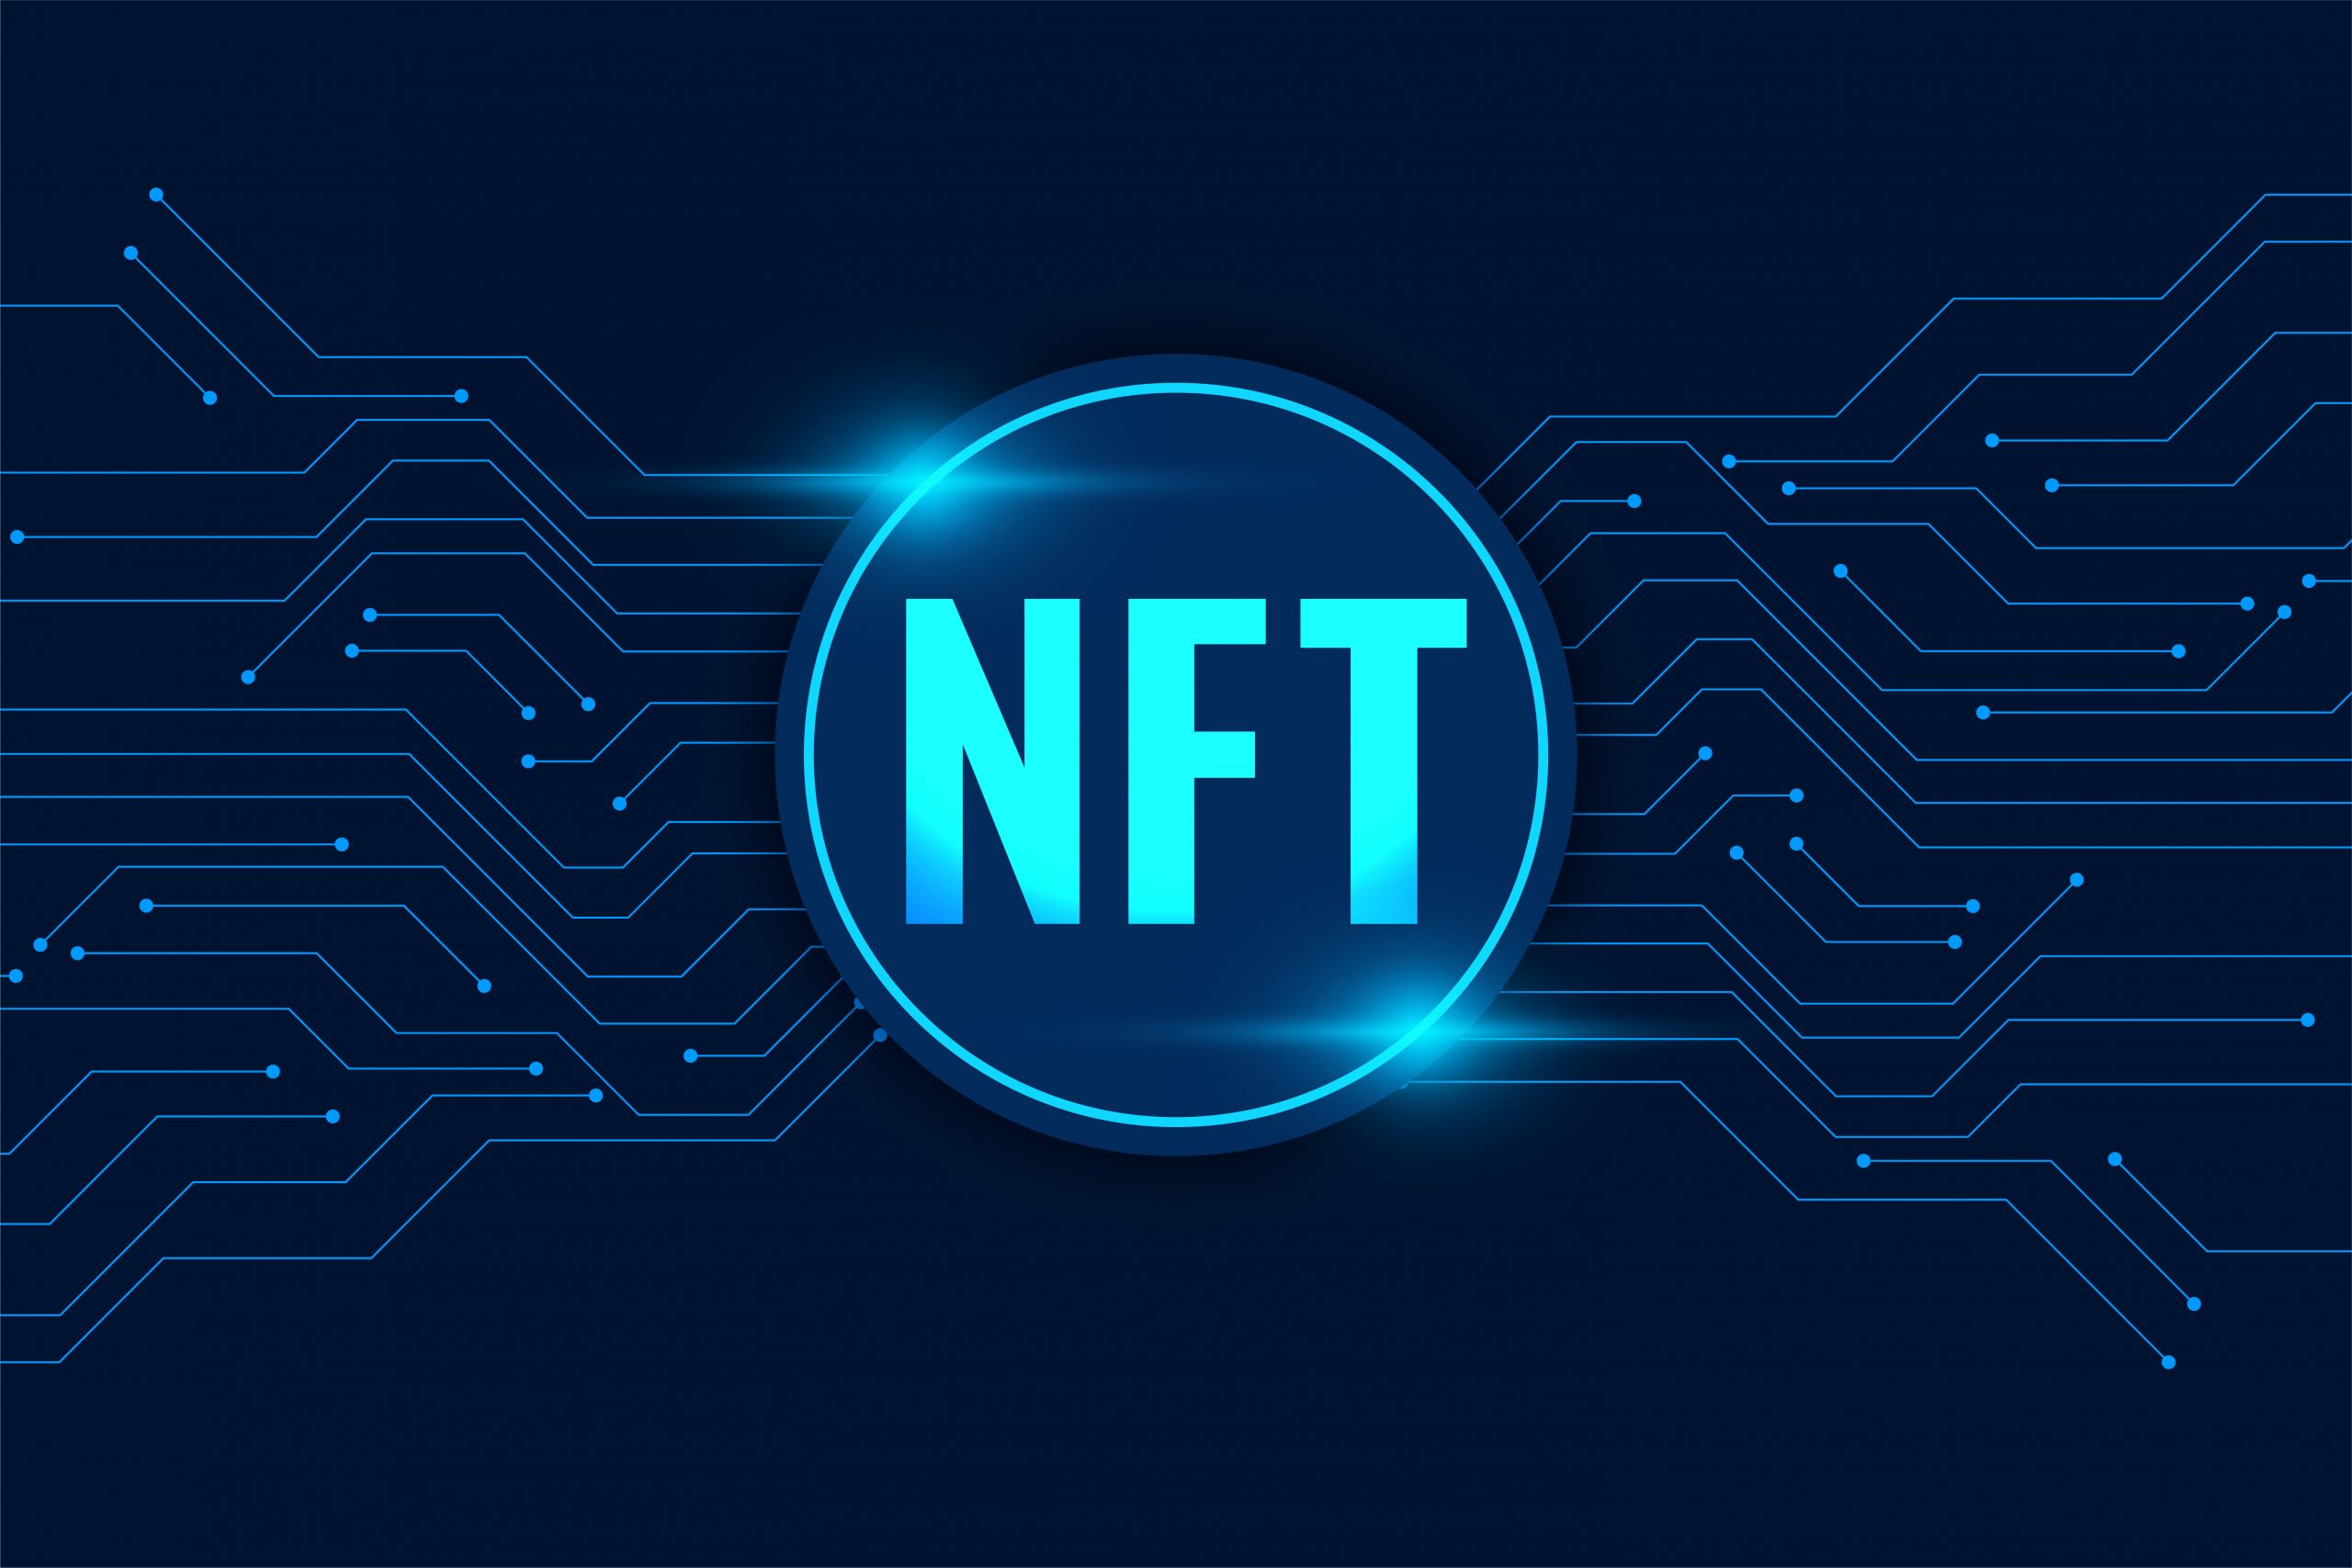 How to Log in with the NFT Platform